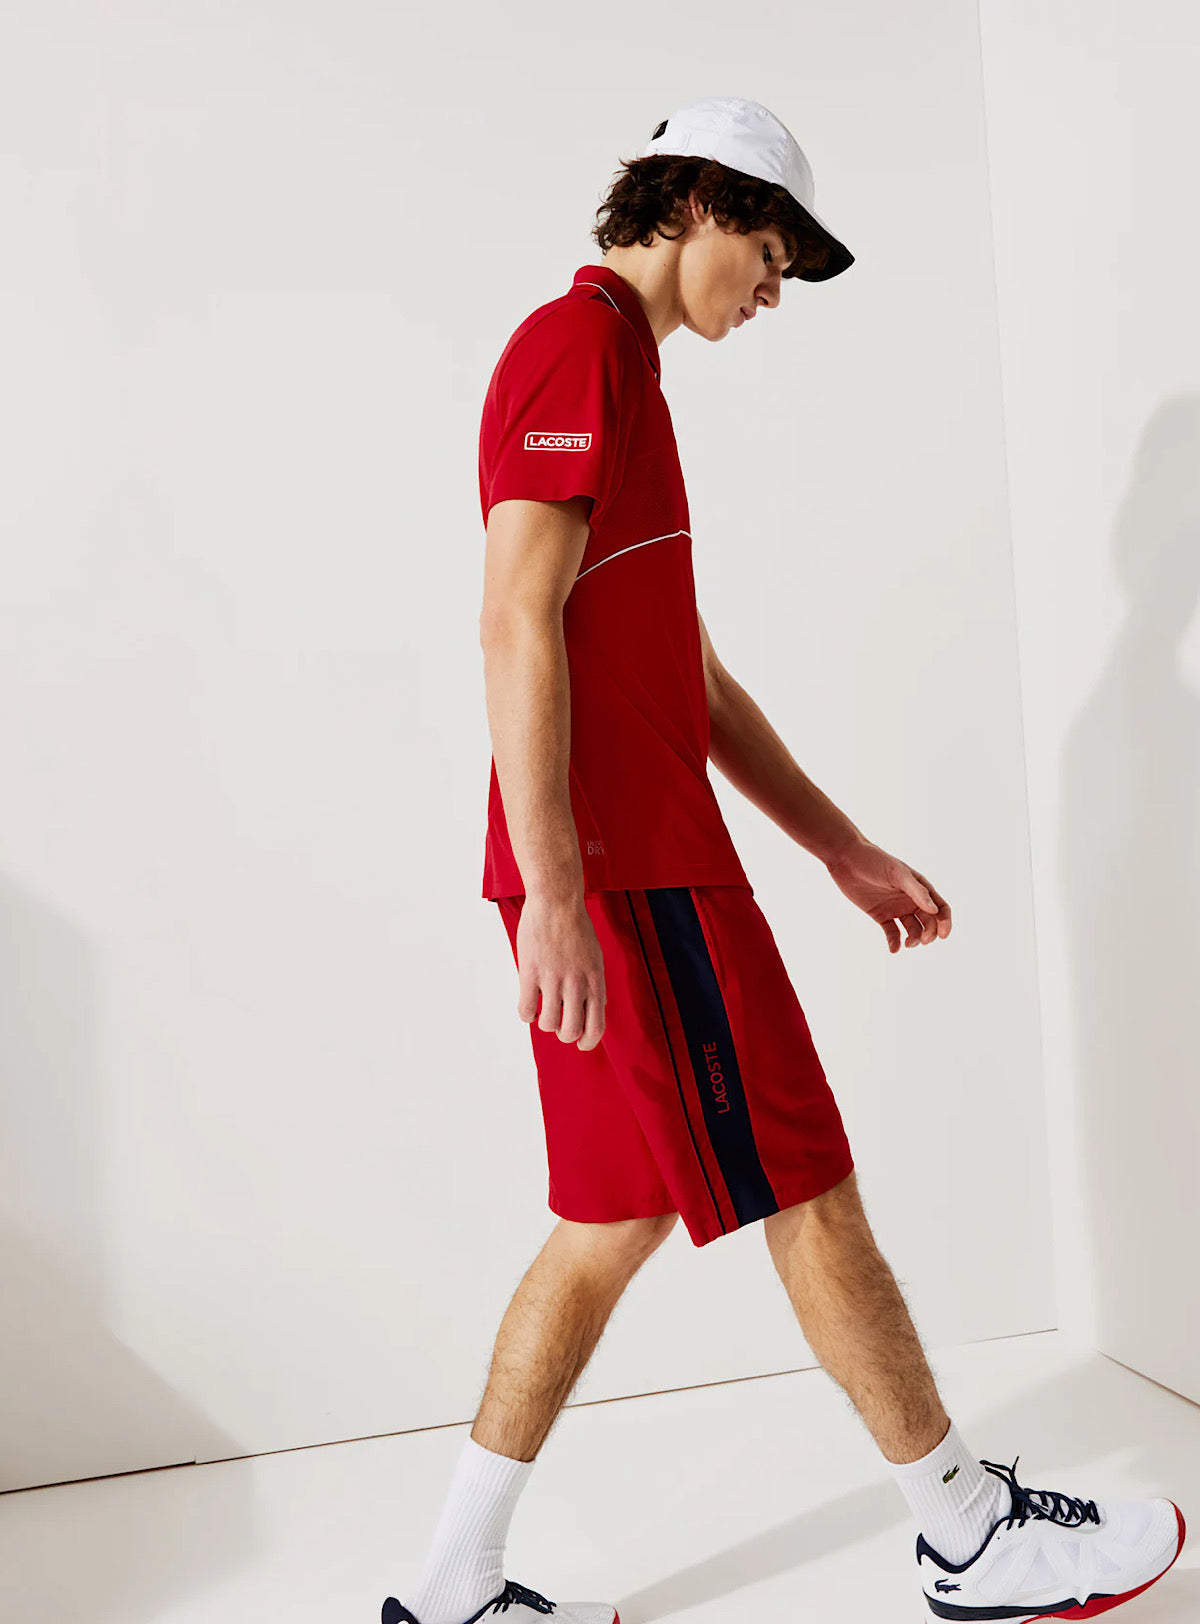 Lacoste Shorts - - Red and Black GH9690 51 EVS –